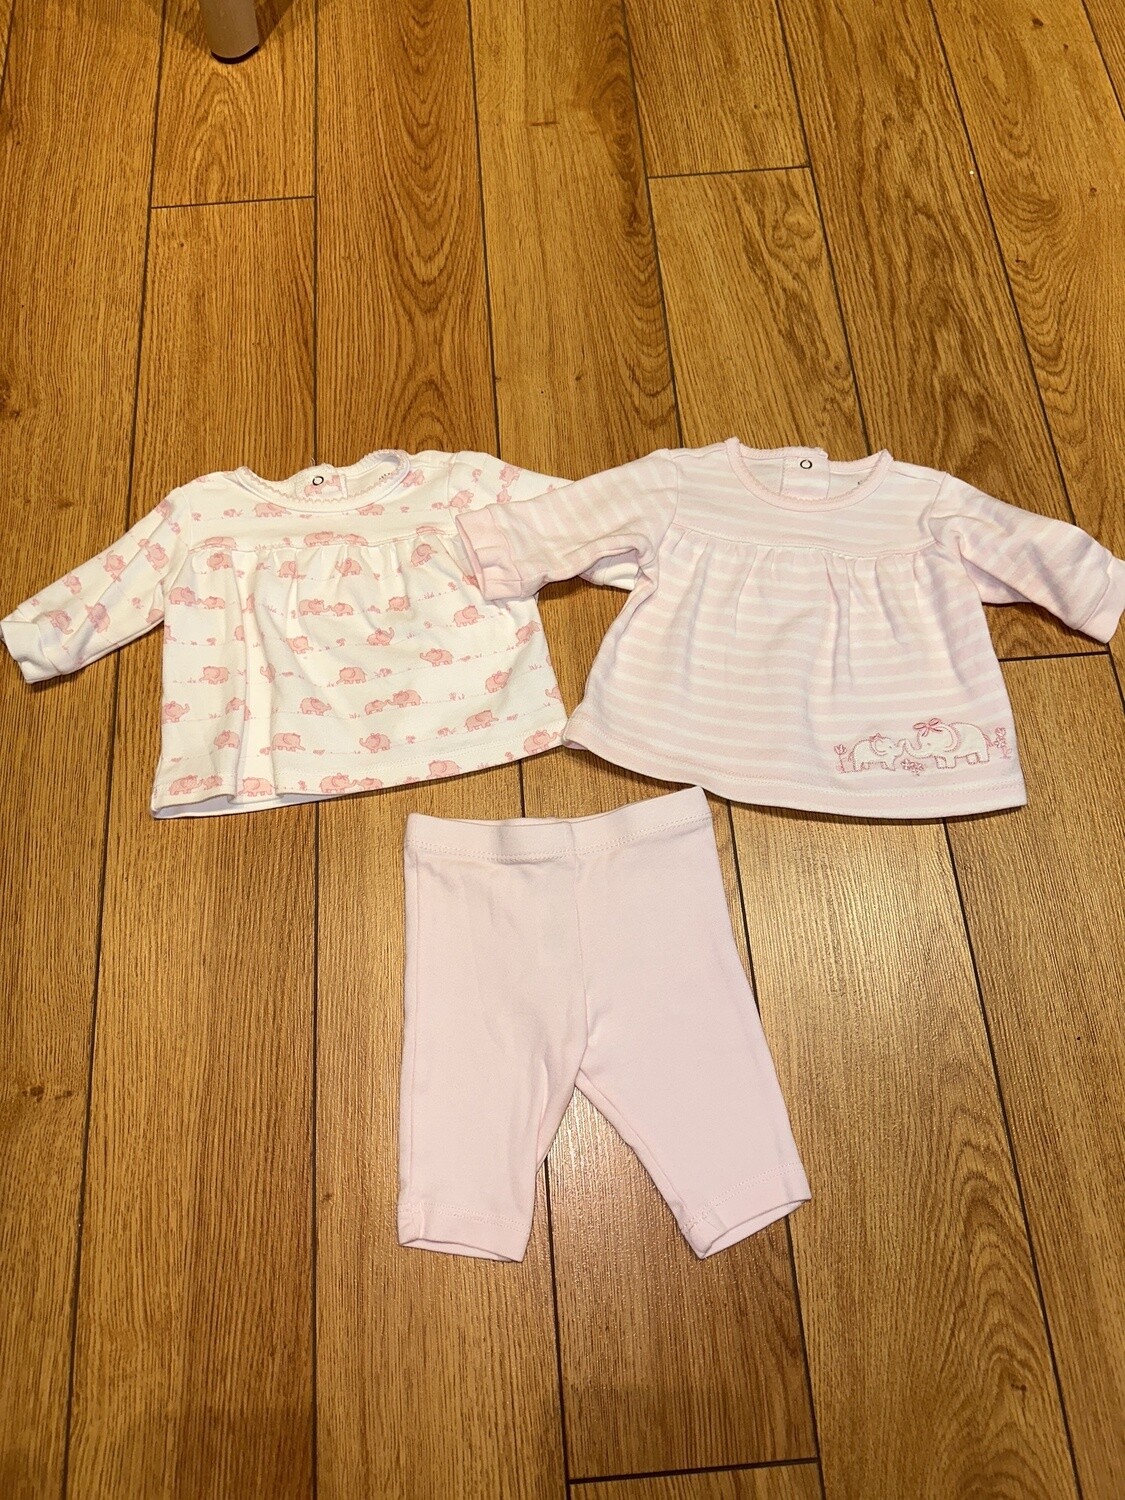 Used - Little Me - Long Sleeve - 3 Months - PWE28